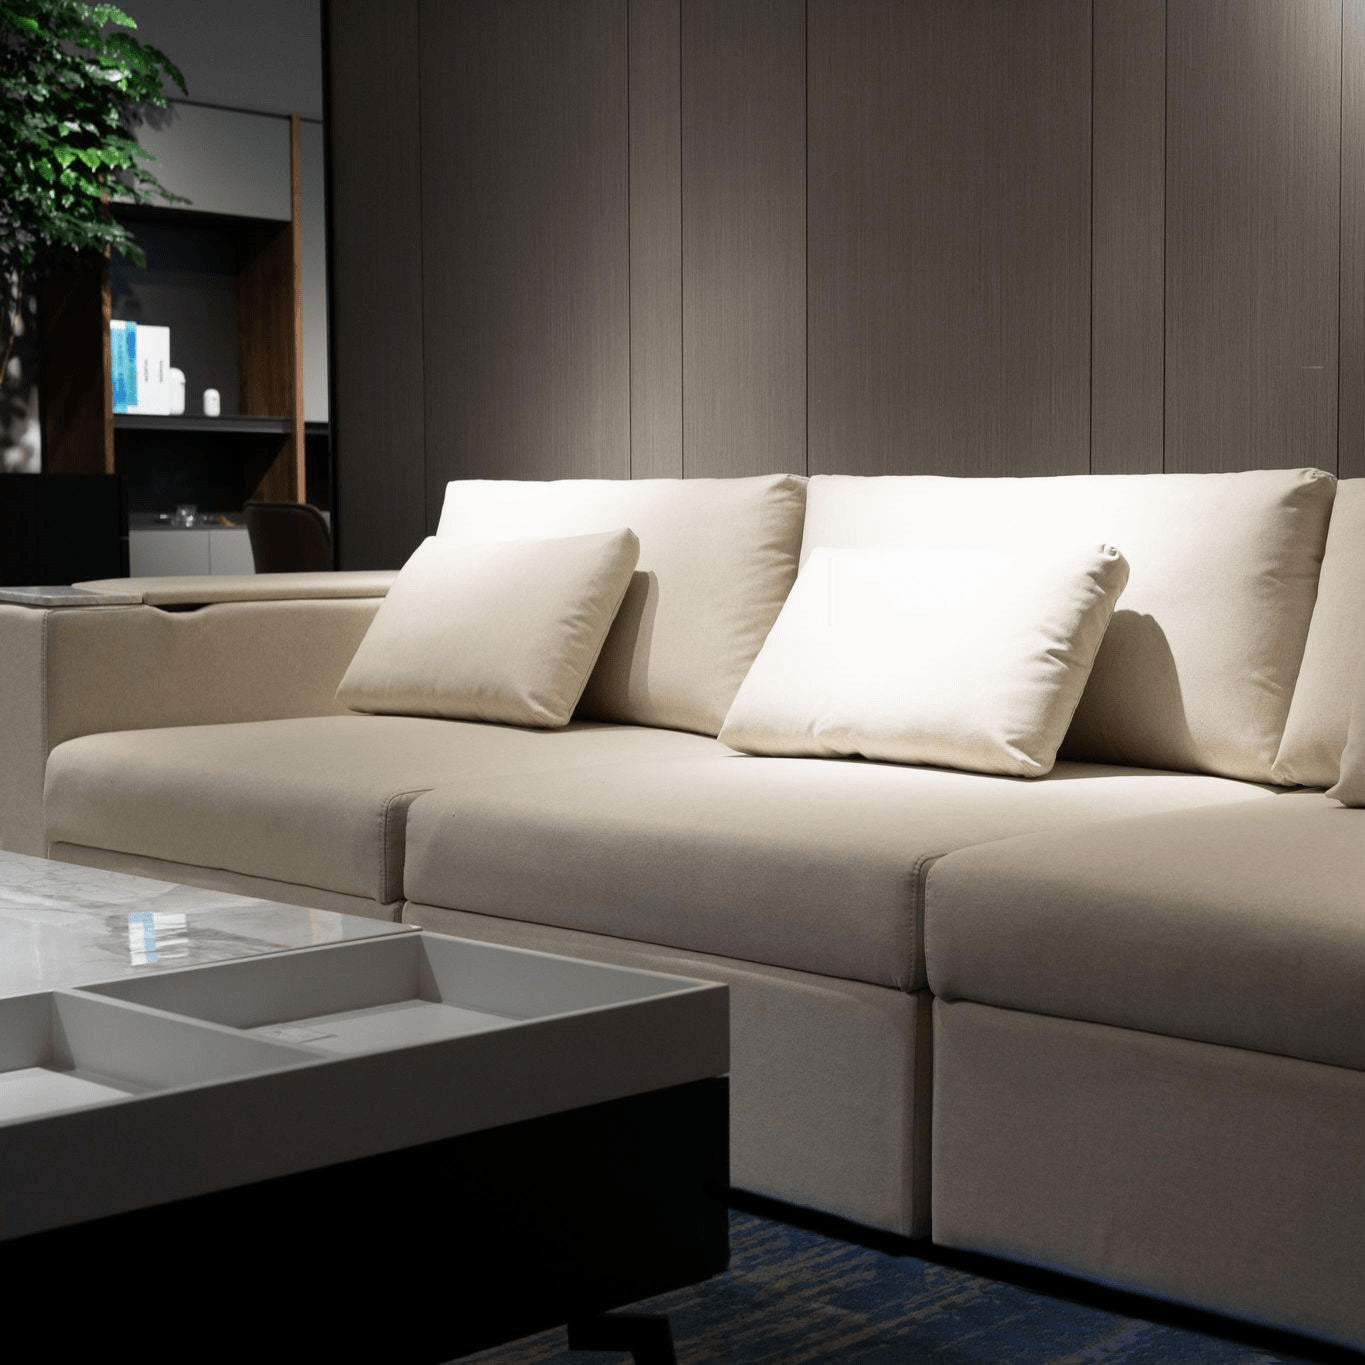 Sectional sofa in the living room